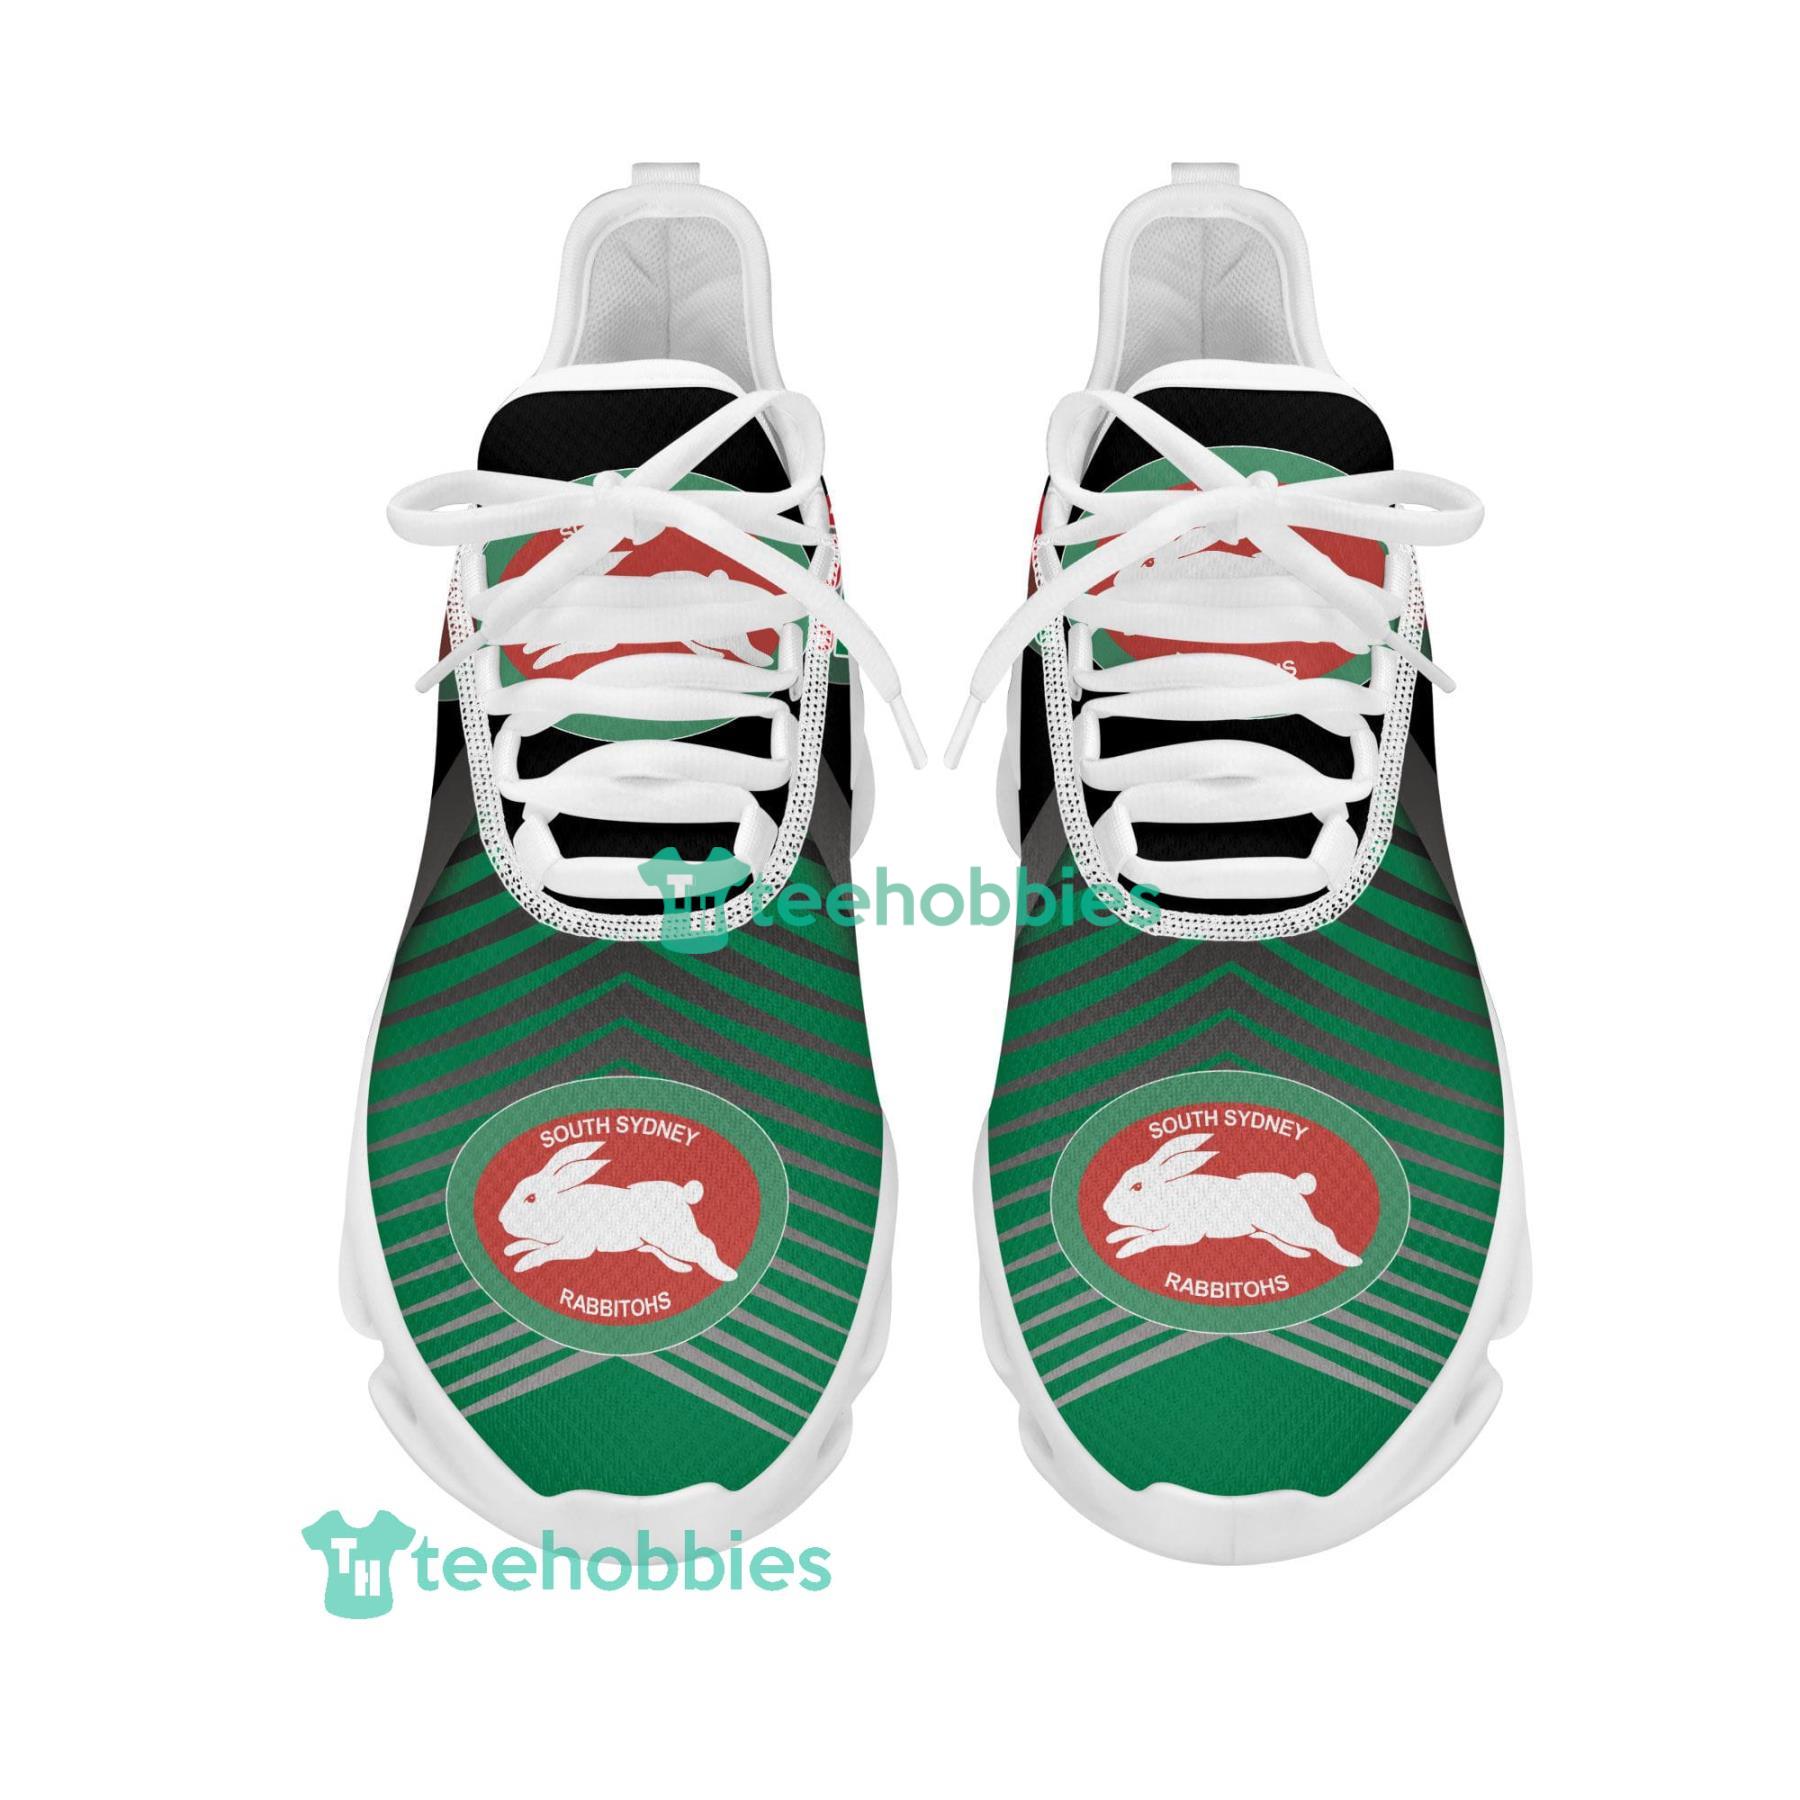 South Sydney Rabbitohs Sport Team Personalized Name Sneakers Max Soul Shoes For Men And Women Product Photo 2